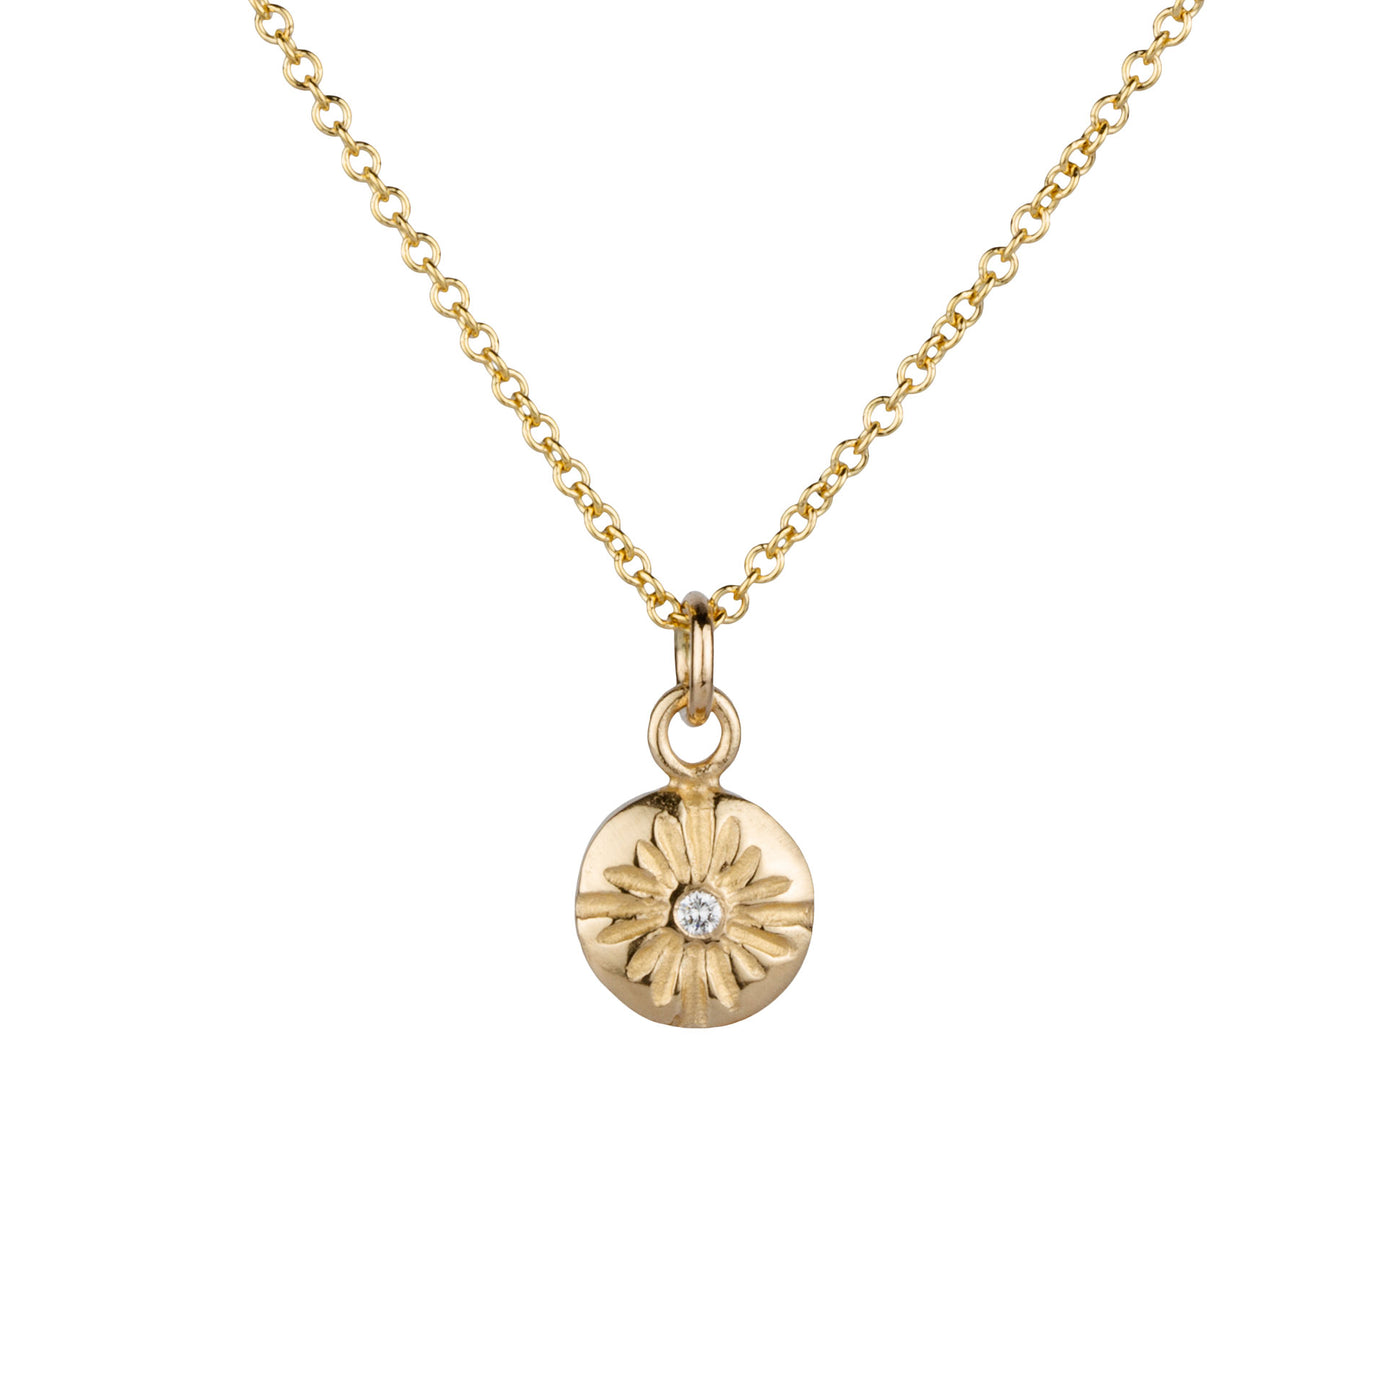 Gold and Diamond Small Sunburst Lucia Necklace on a white background